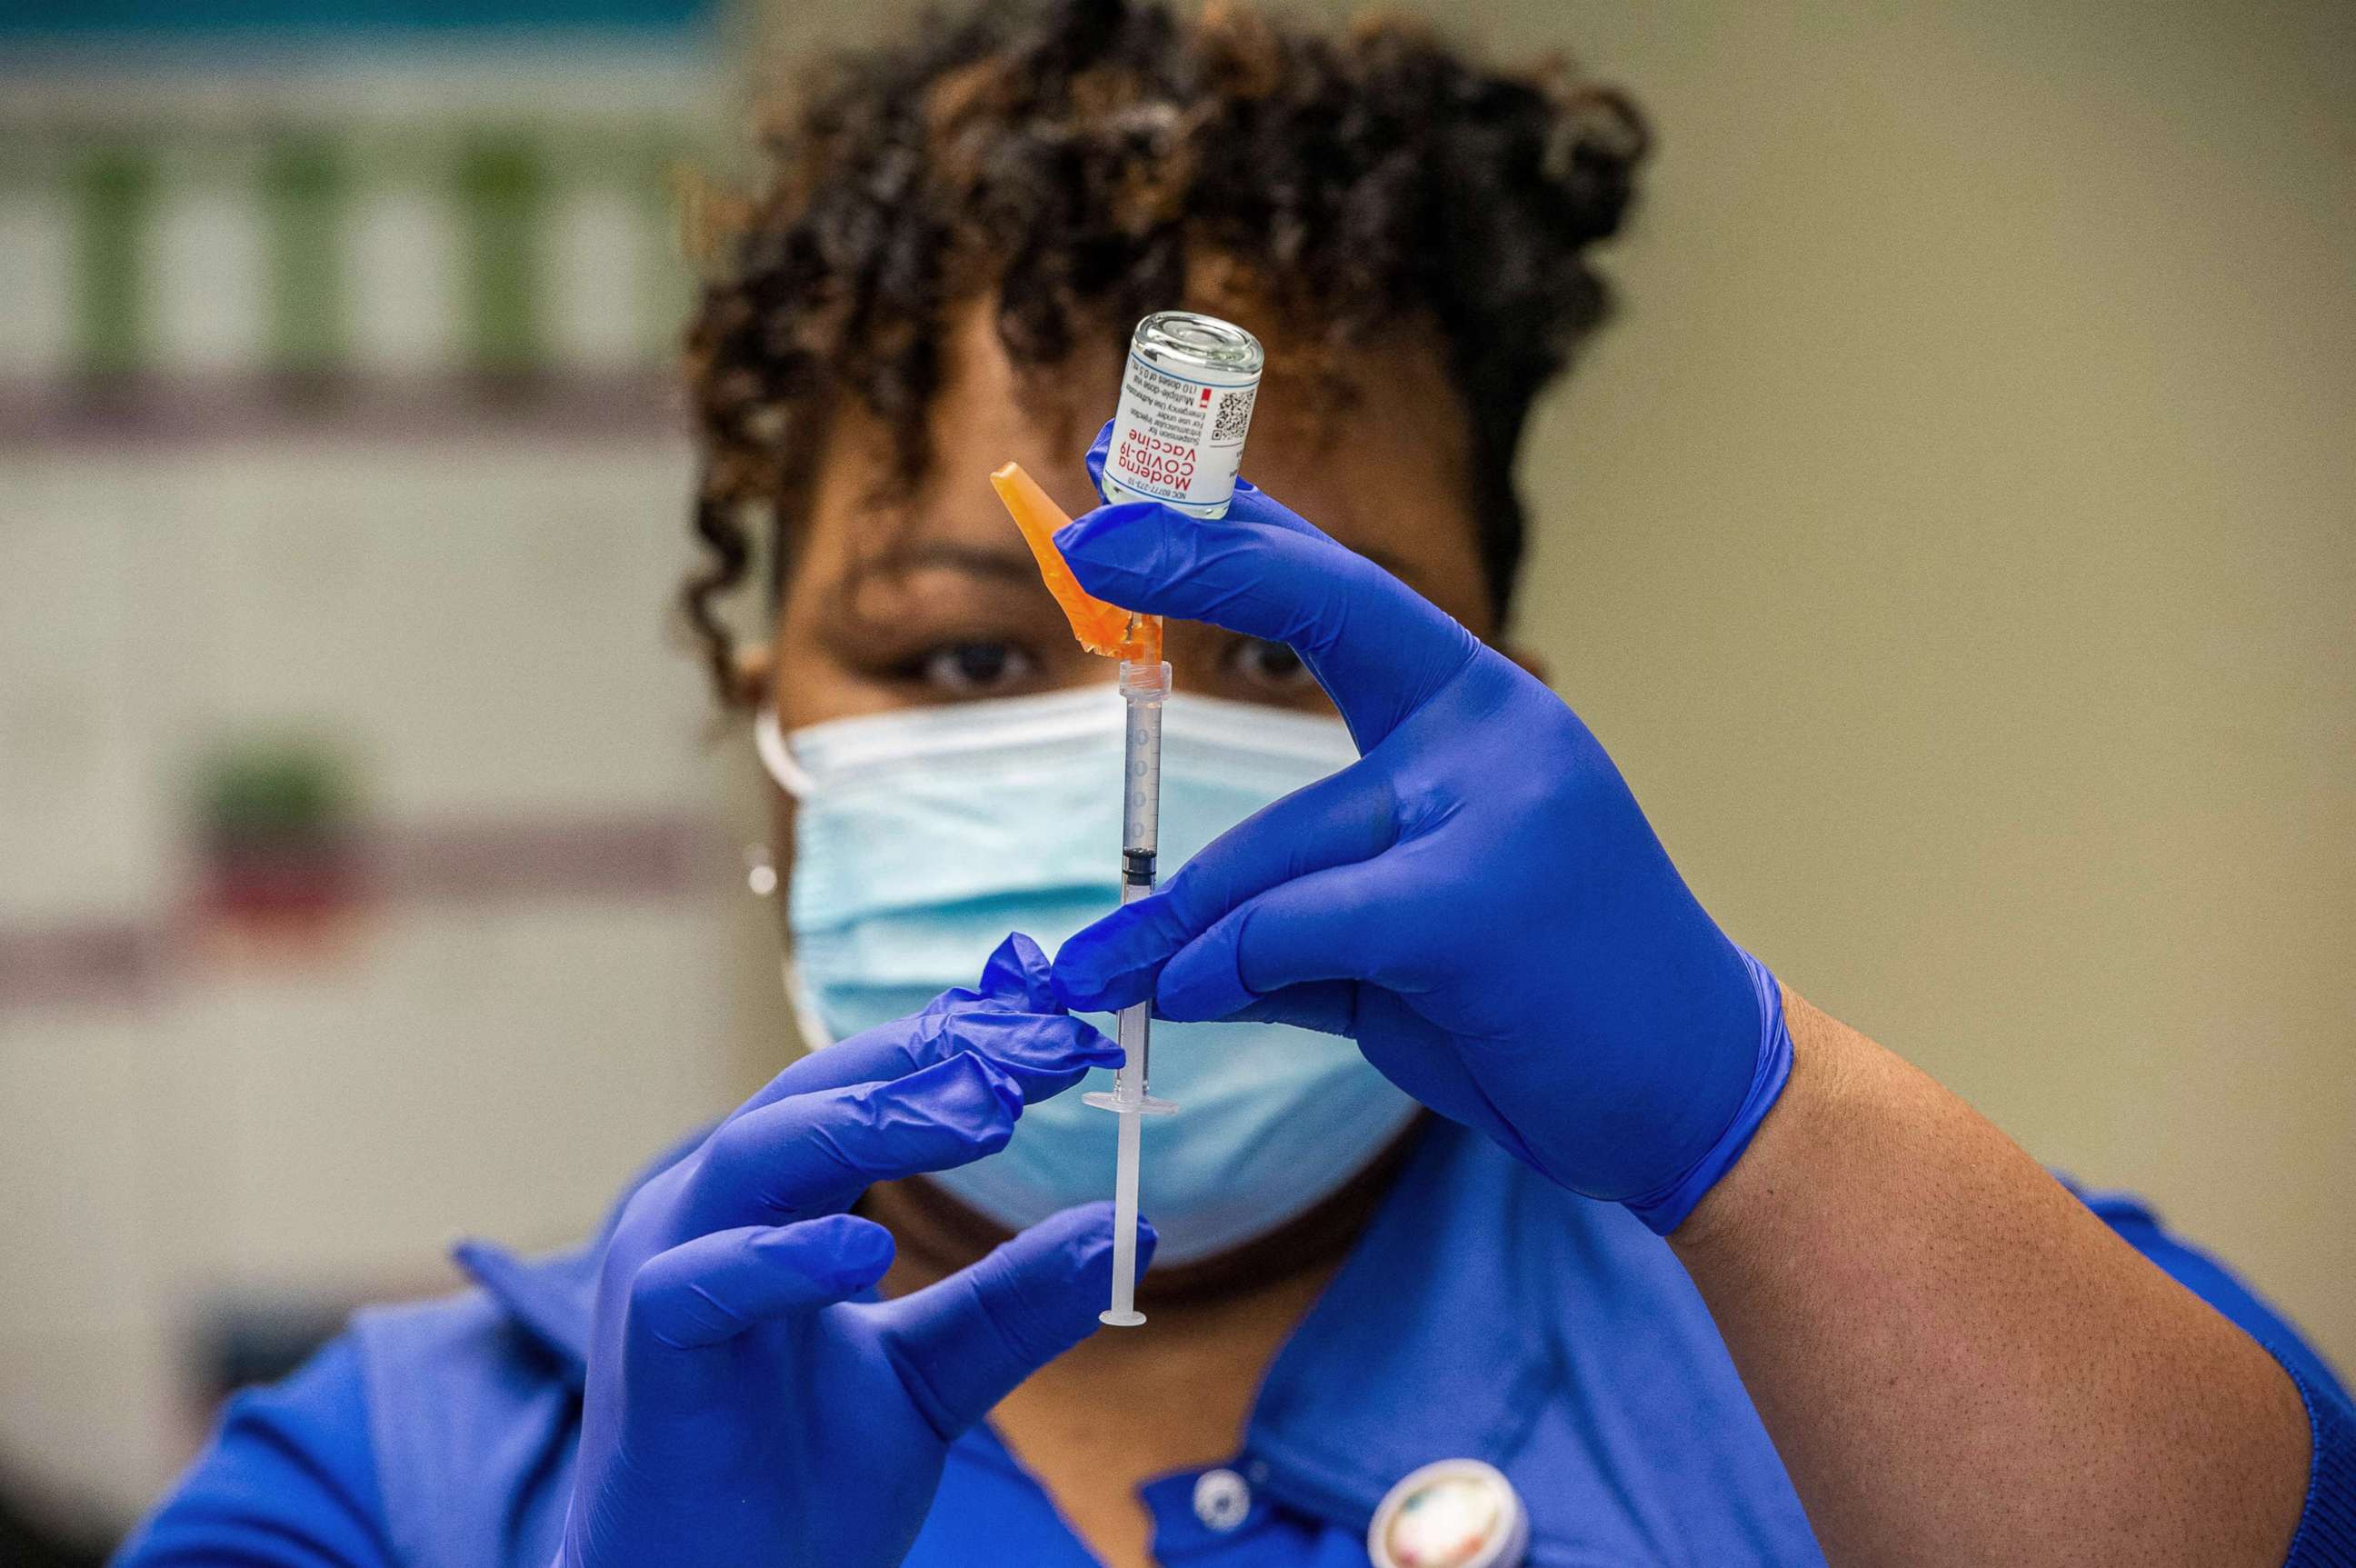 PHOTO: RN Natalie O'Connor loads syringes with the Moderna COVID-19 vaccine before heading out to see patients in Bloomfield, Ct., Feb. 12, 2021.